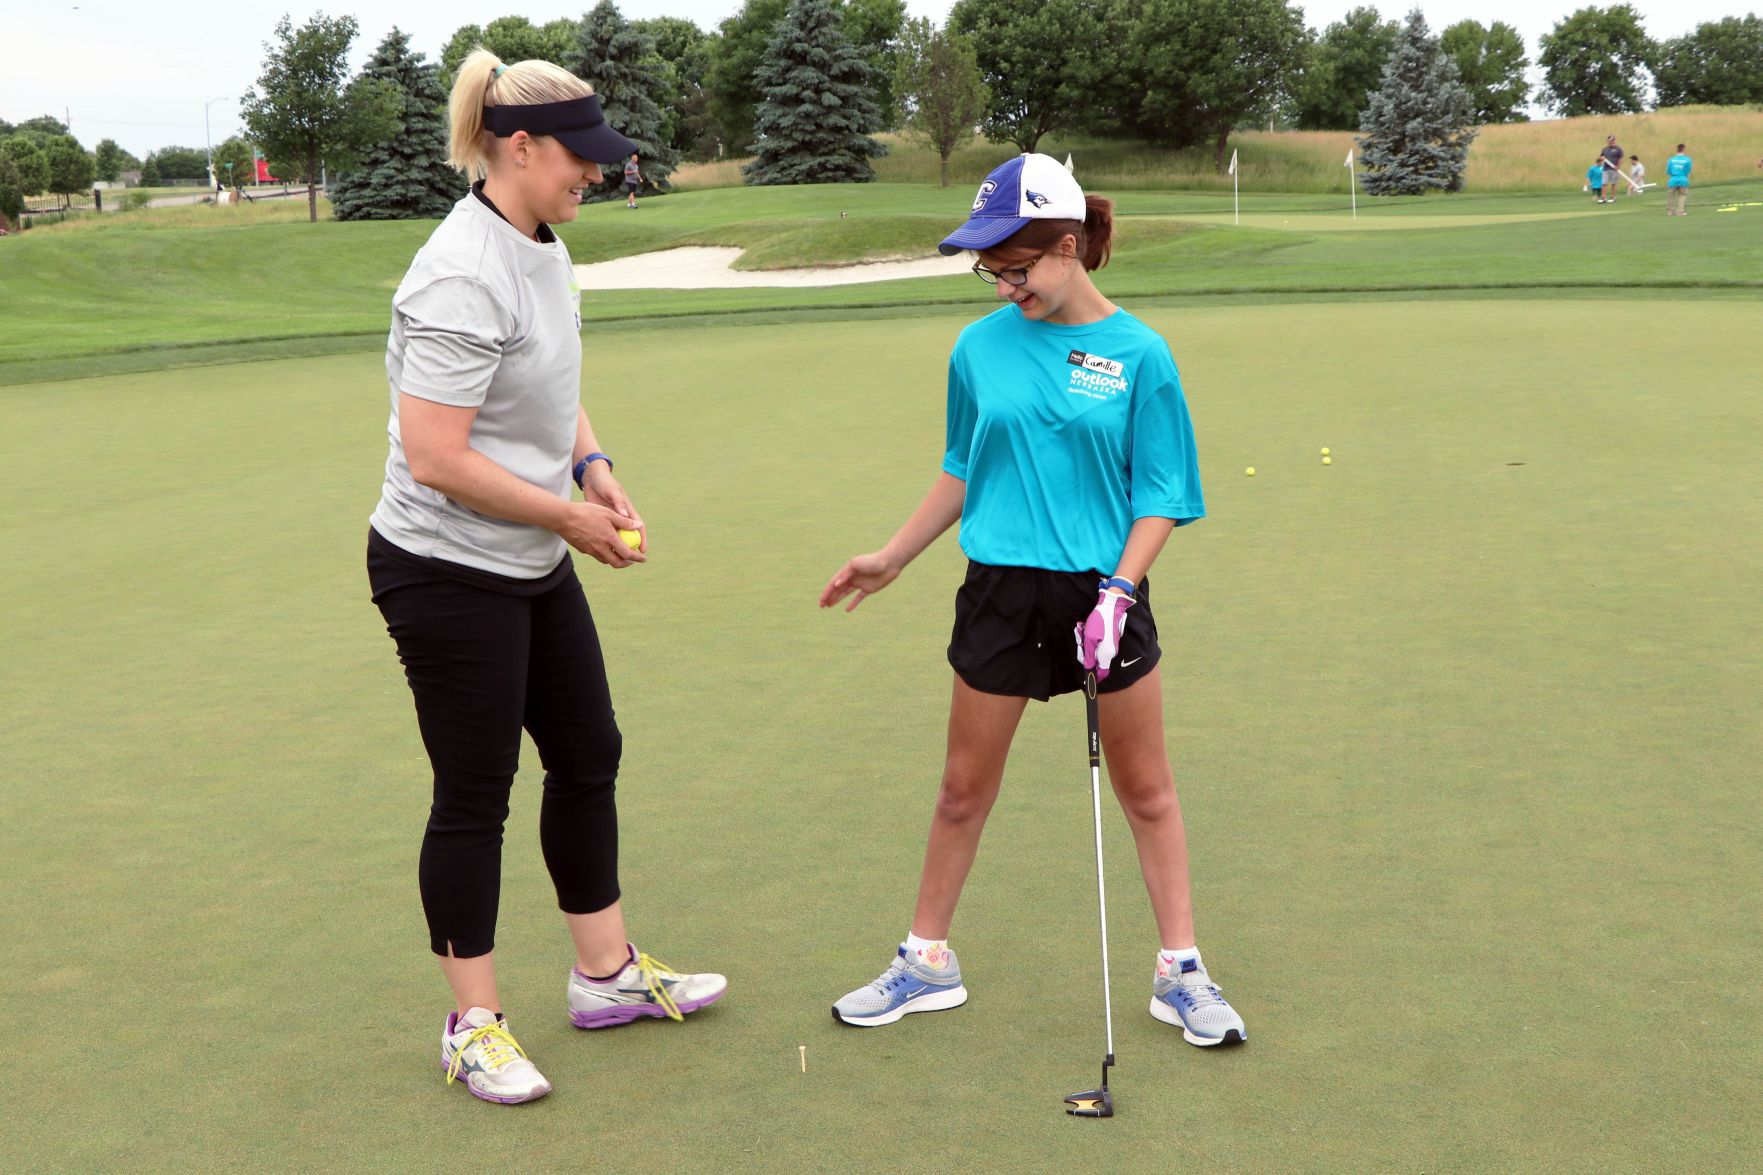 Visually impaired golfers gain confidence from clinic at Omaha course